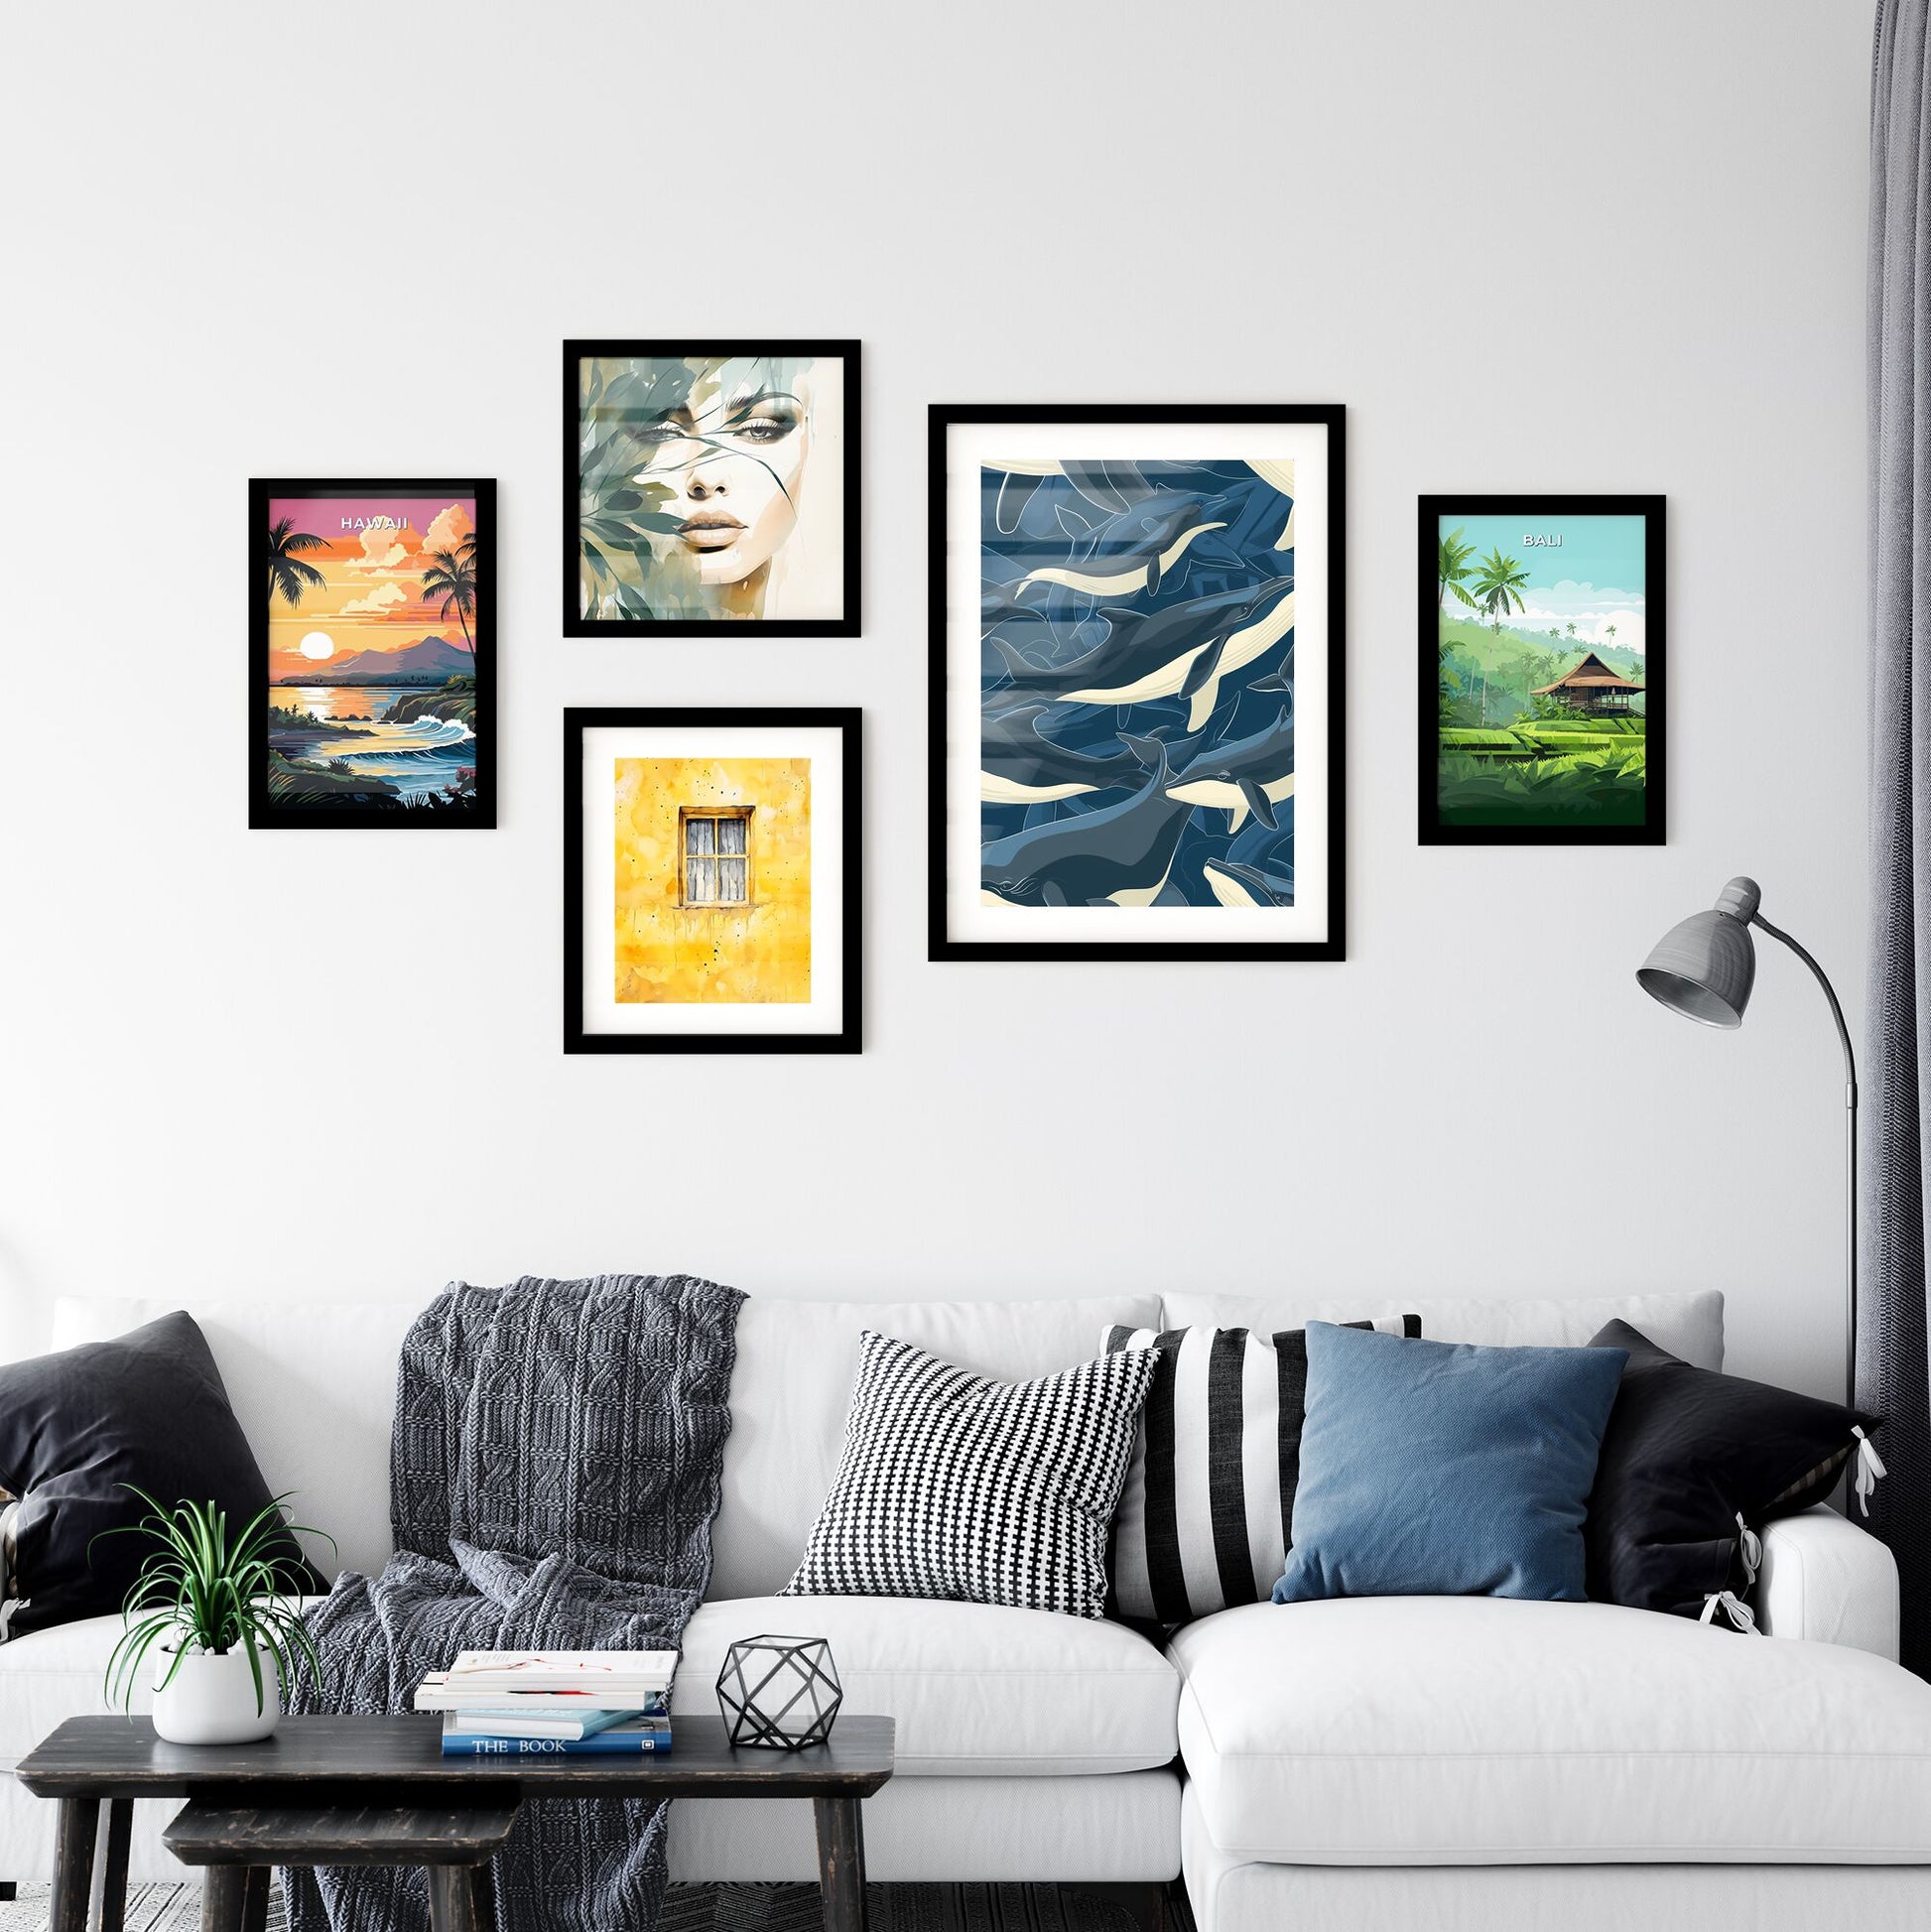 Smiling cute cartoon whales in different poses, swimming in a swirl - Art print of a group of whales in the water Default Title